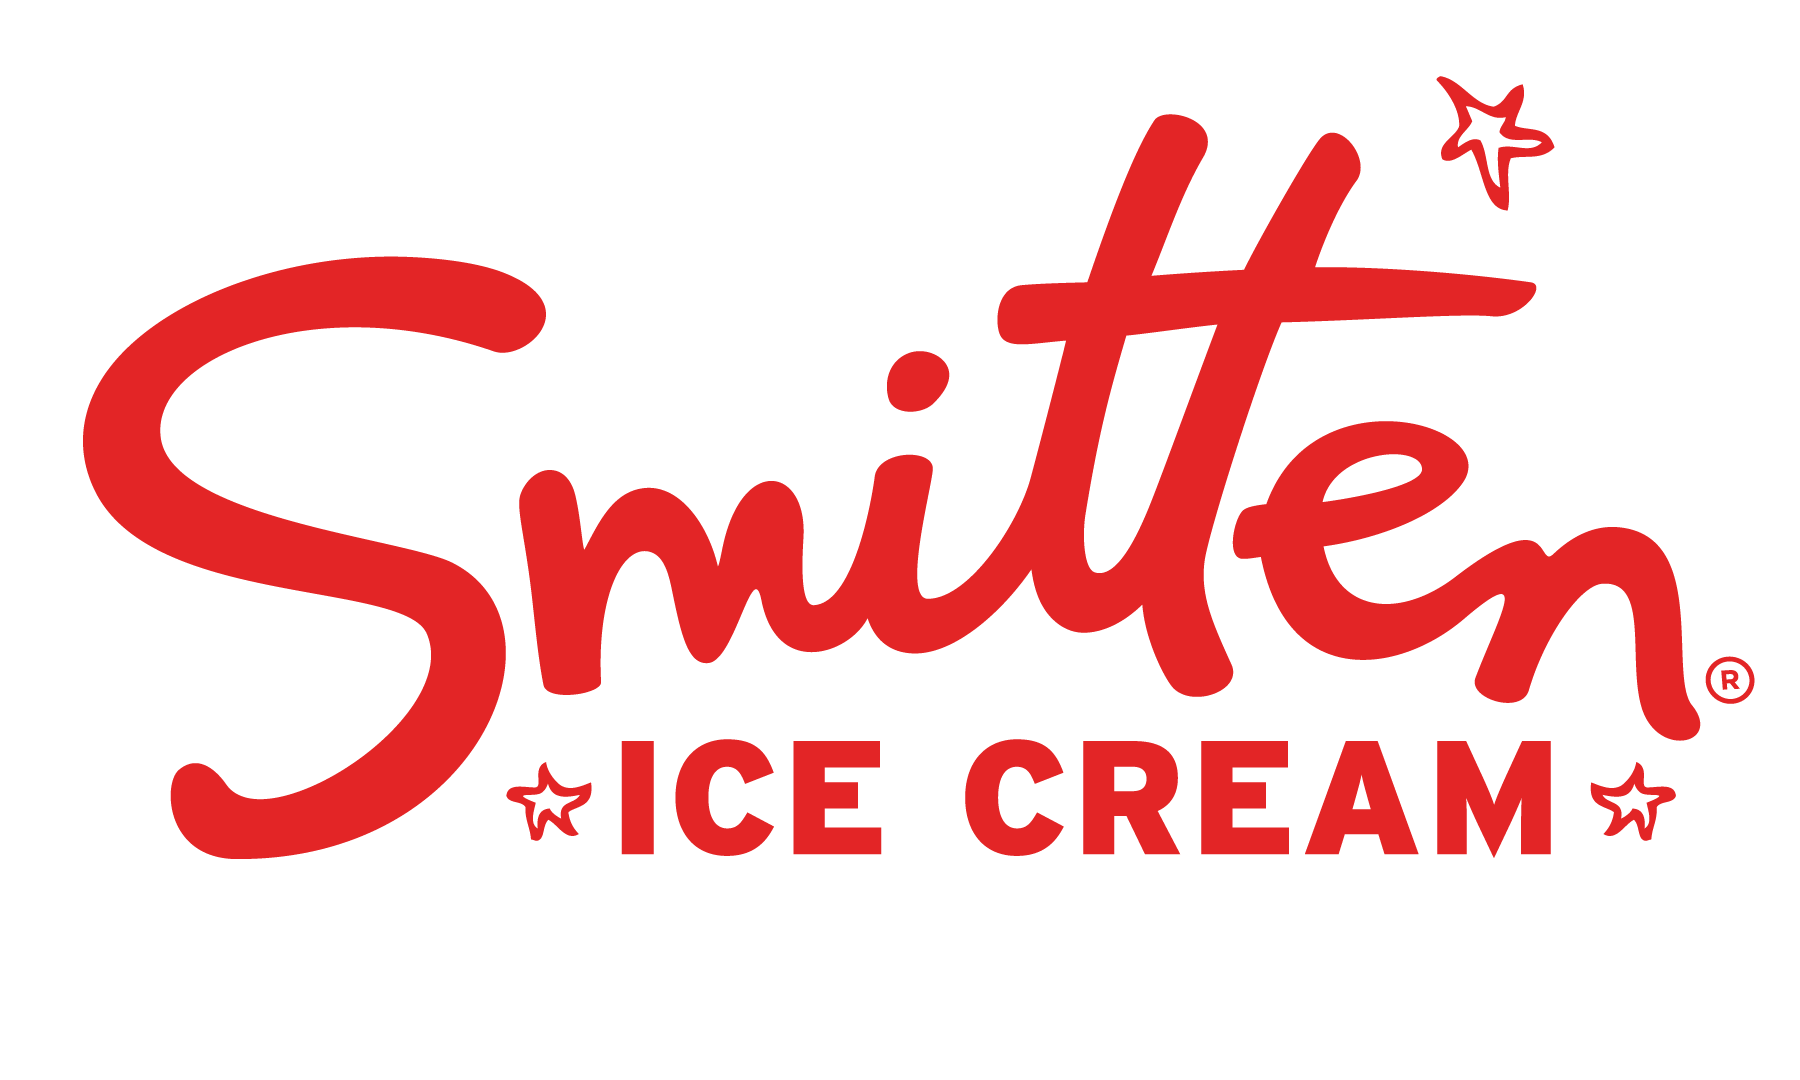 Red Ice Cream Brand Logo - Smitten Ice Cream | Churned-to-order. Just for you.